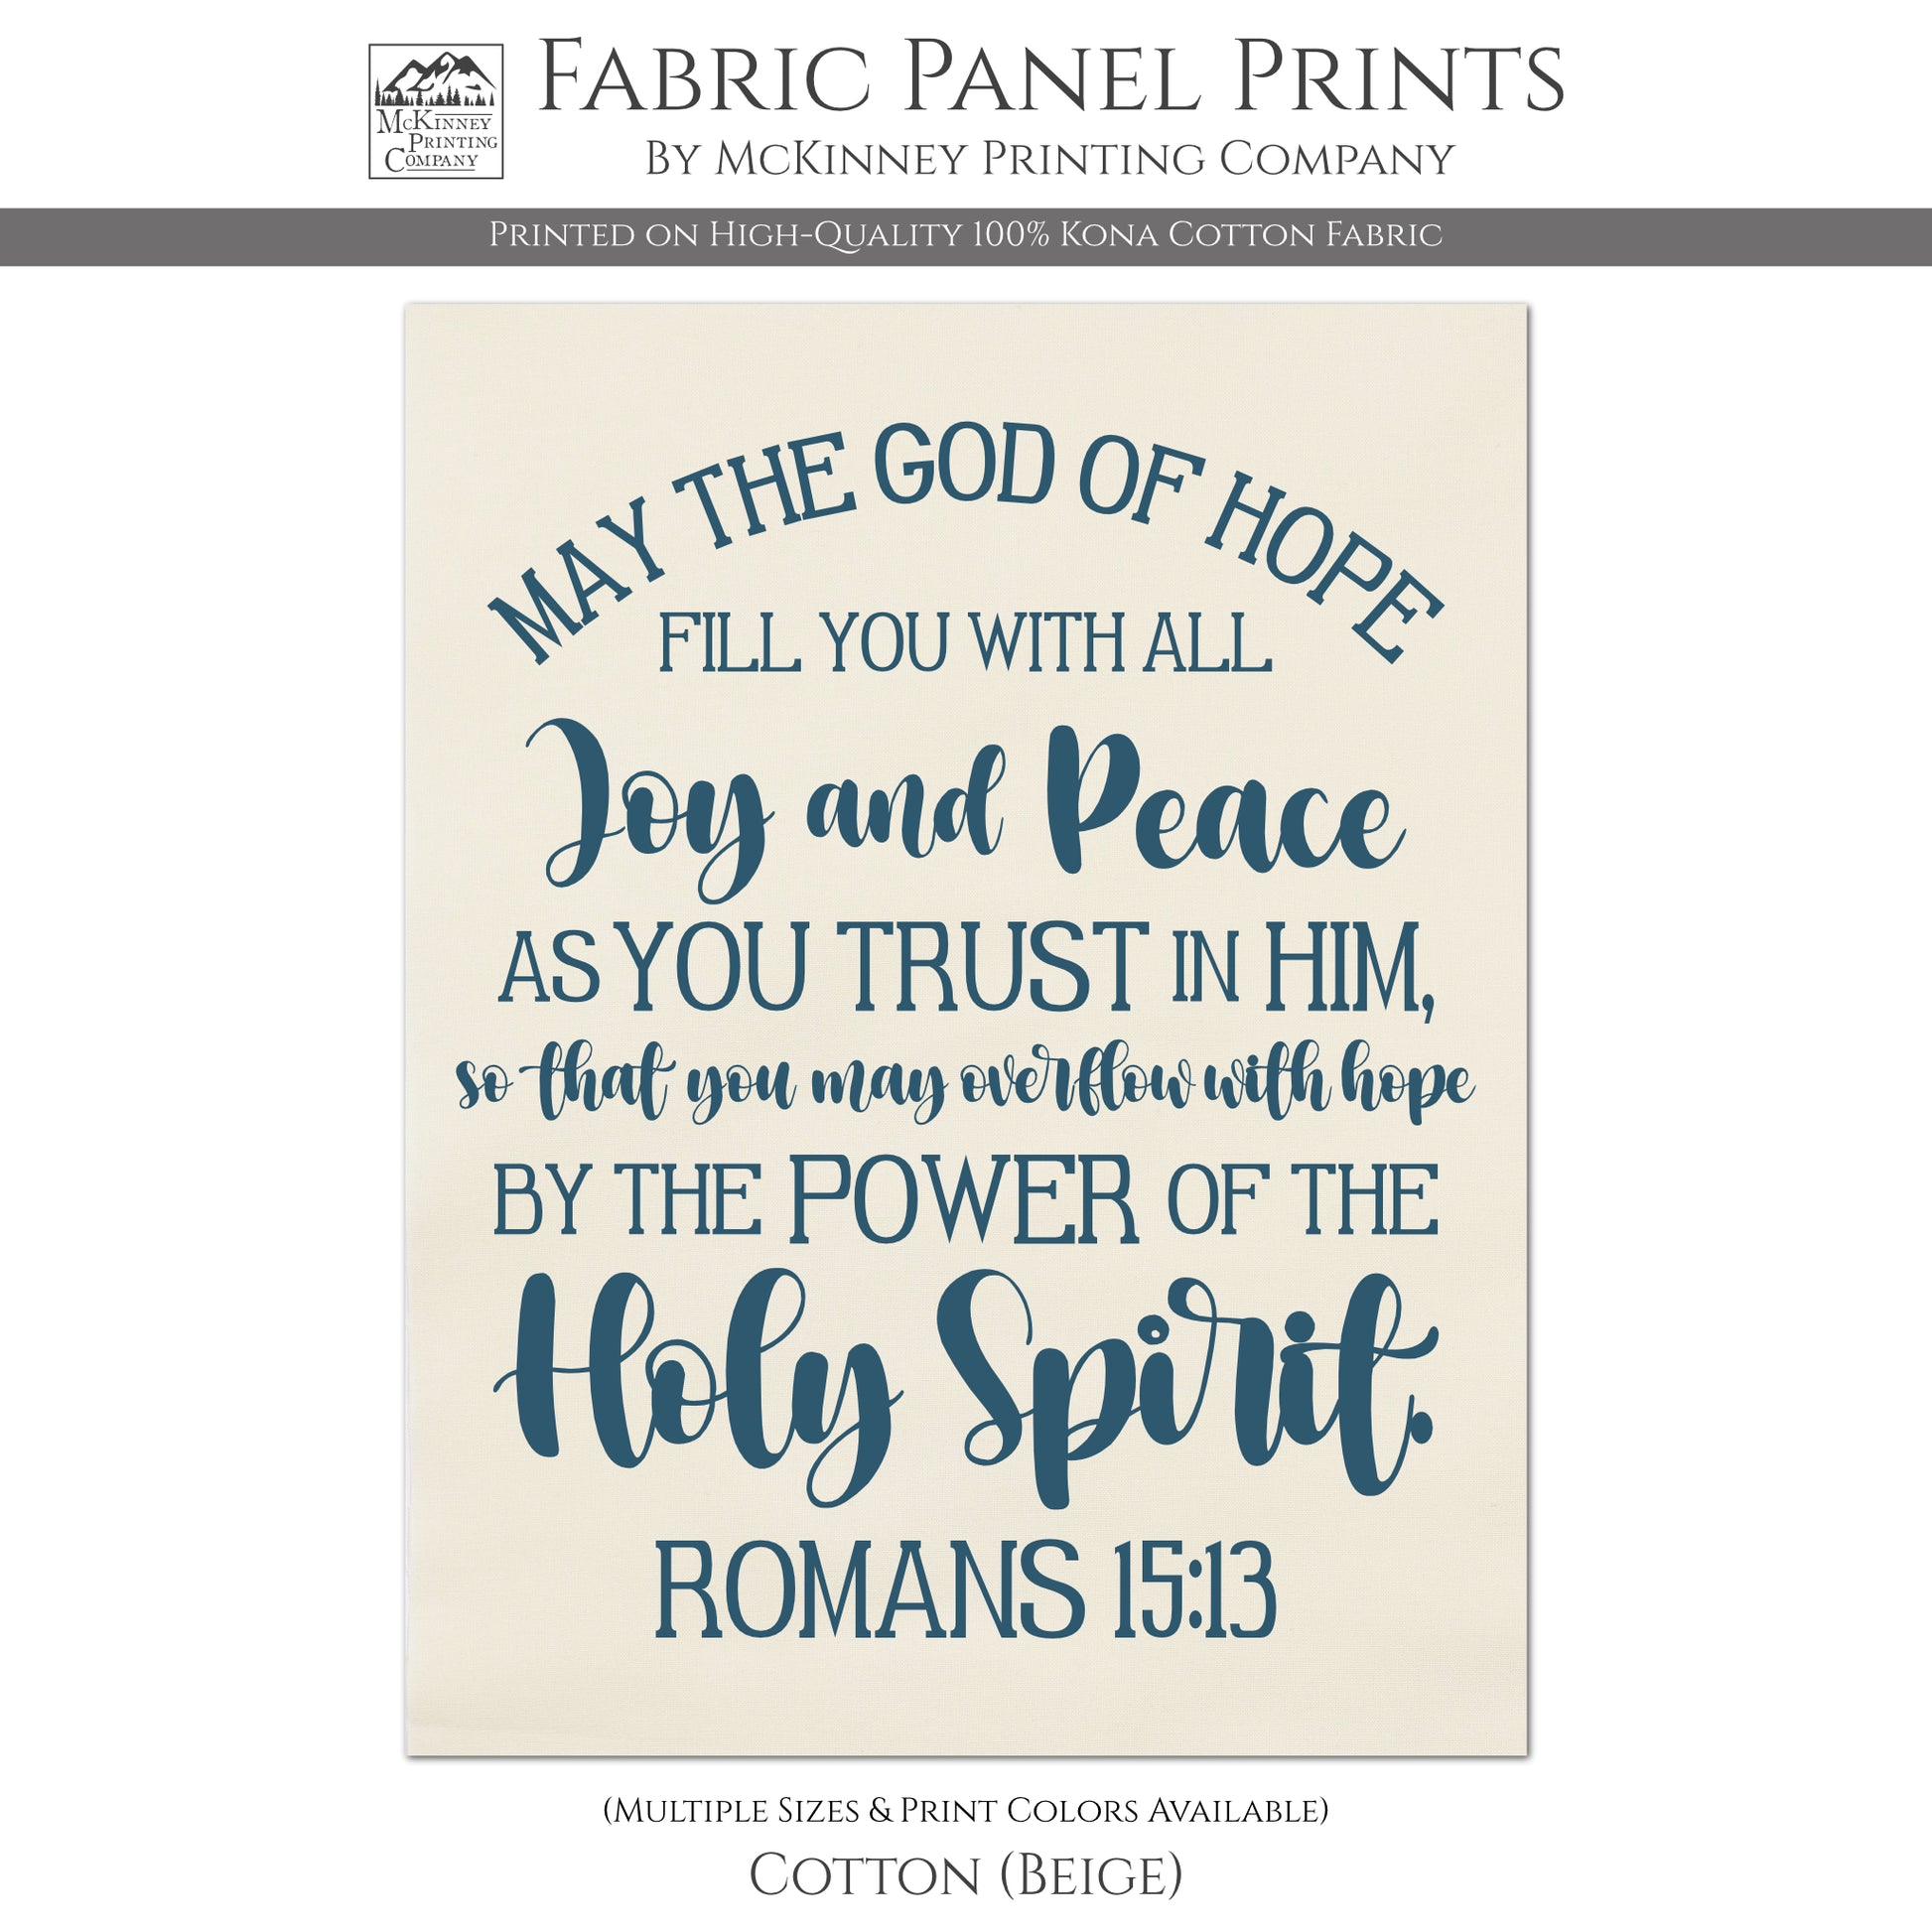 Romans 5:13 - May the God of hope fill you with all joy and peace as you trust in Him, so that you may overflow with hope by the power of the Holy Spirit - Romans 15:13 - Fabric Panel Print, Quilt Block - Cotton